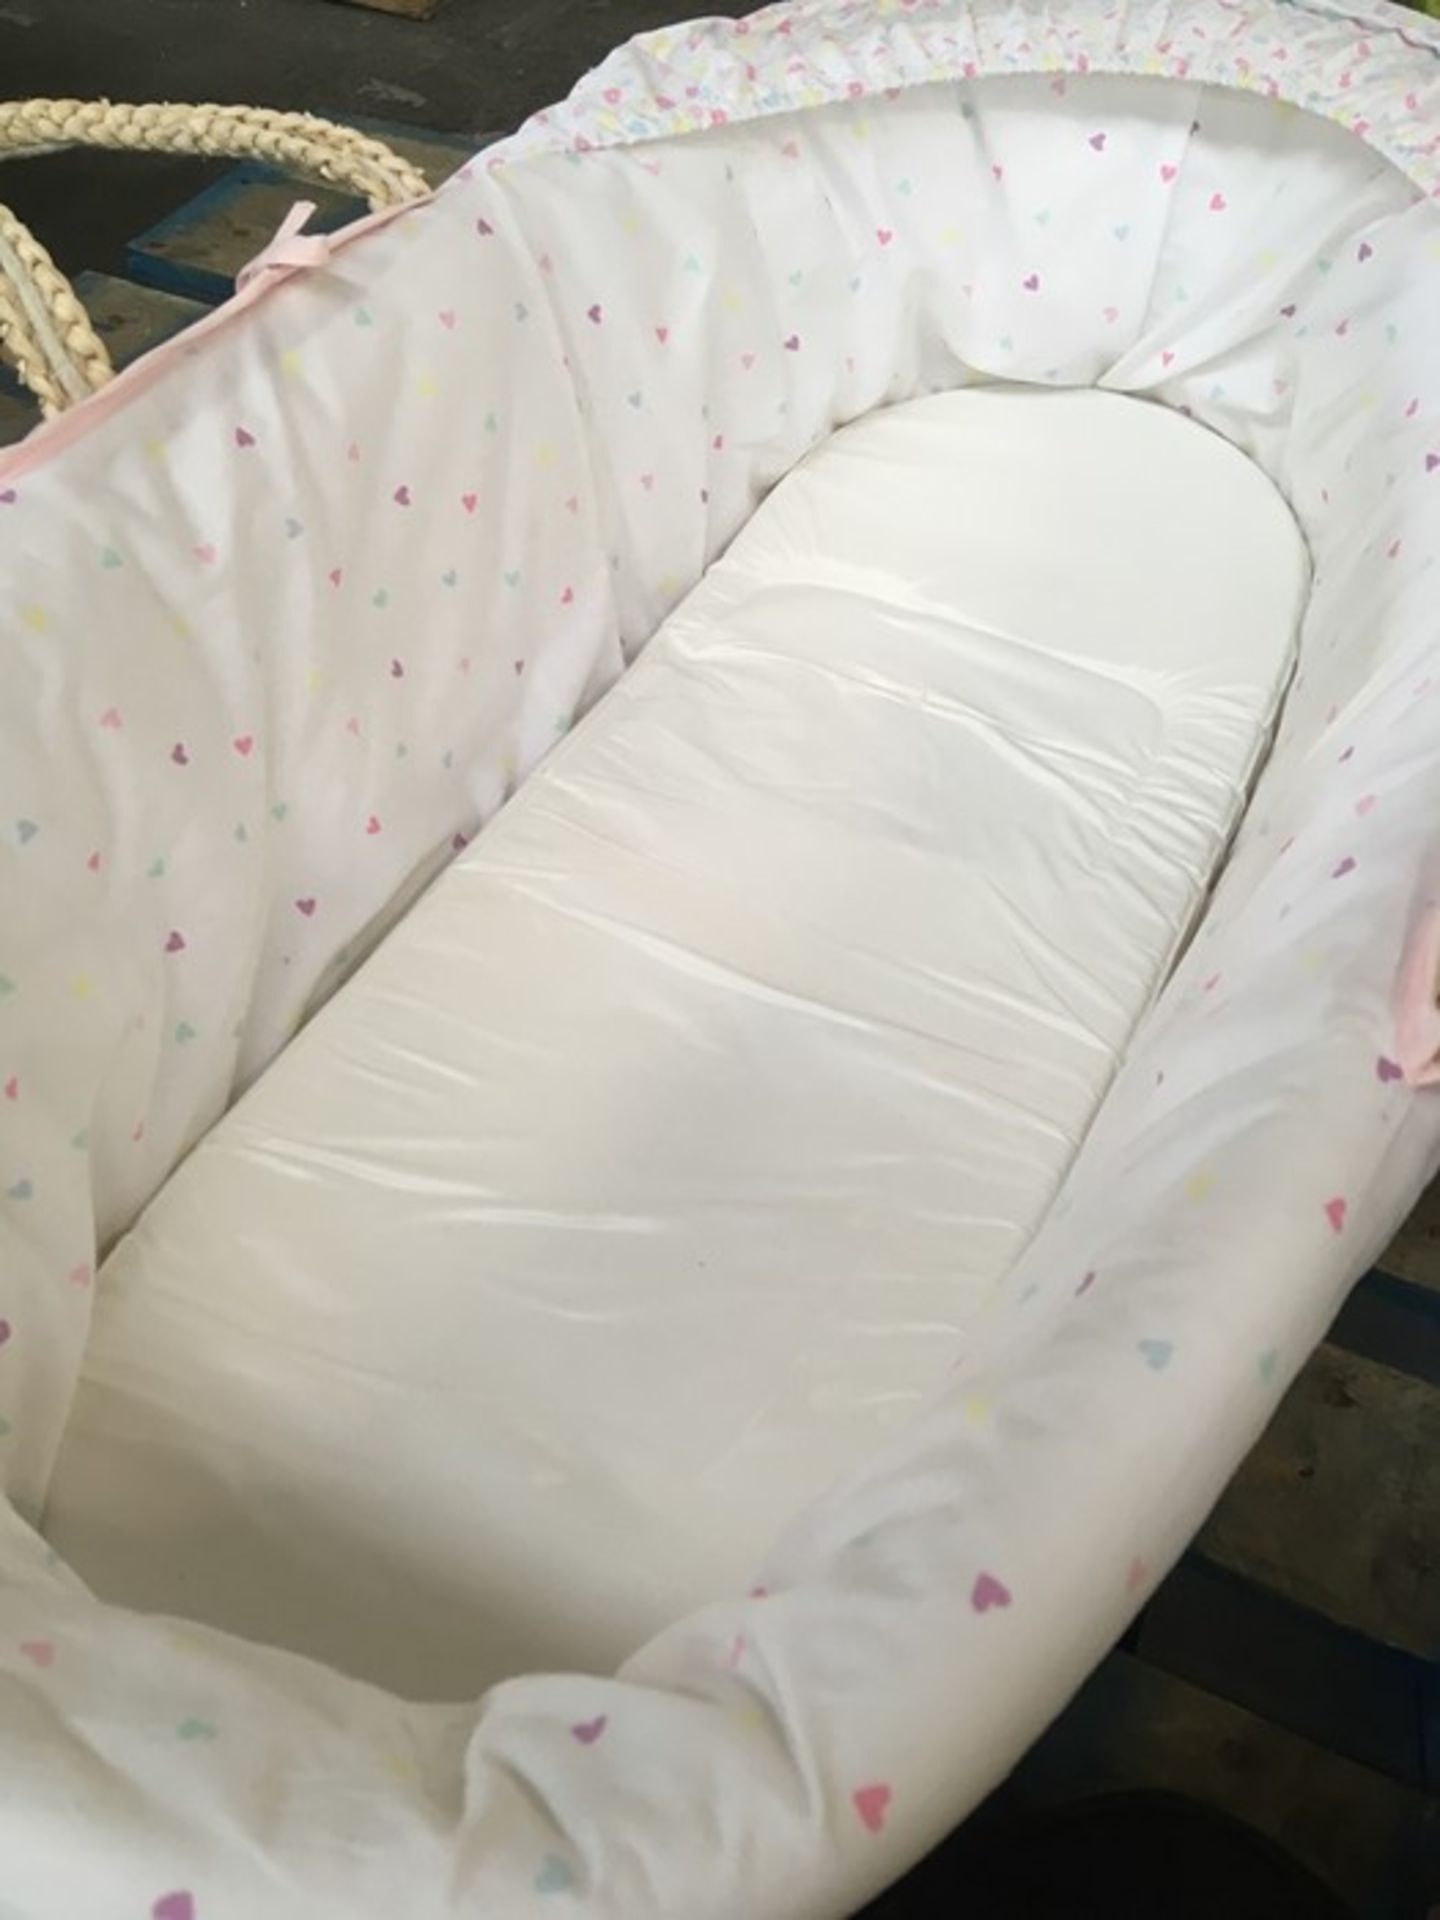 1 CONFETTI PARTY MOSES BASKET / FLORAL THEMED / RRP £60.00 (PUBLIC VIEWNG AVAILABLE)